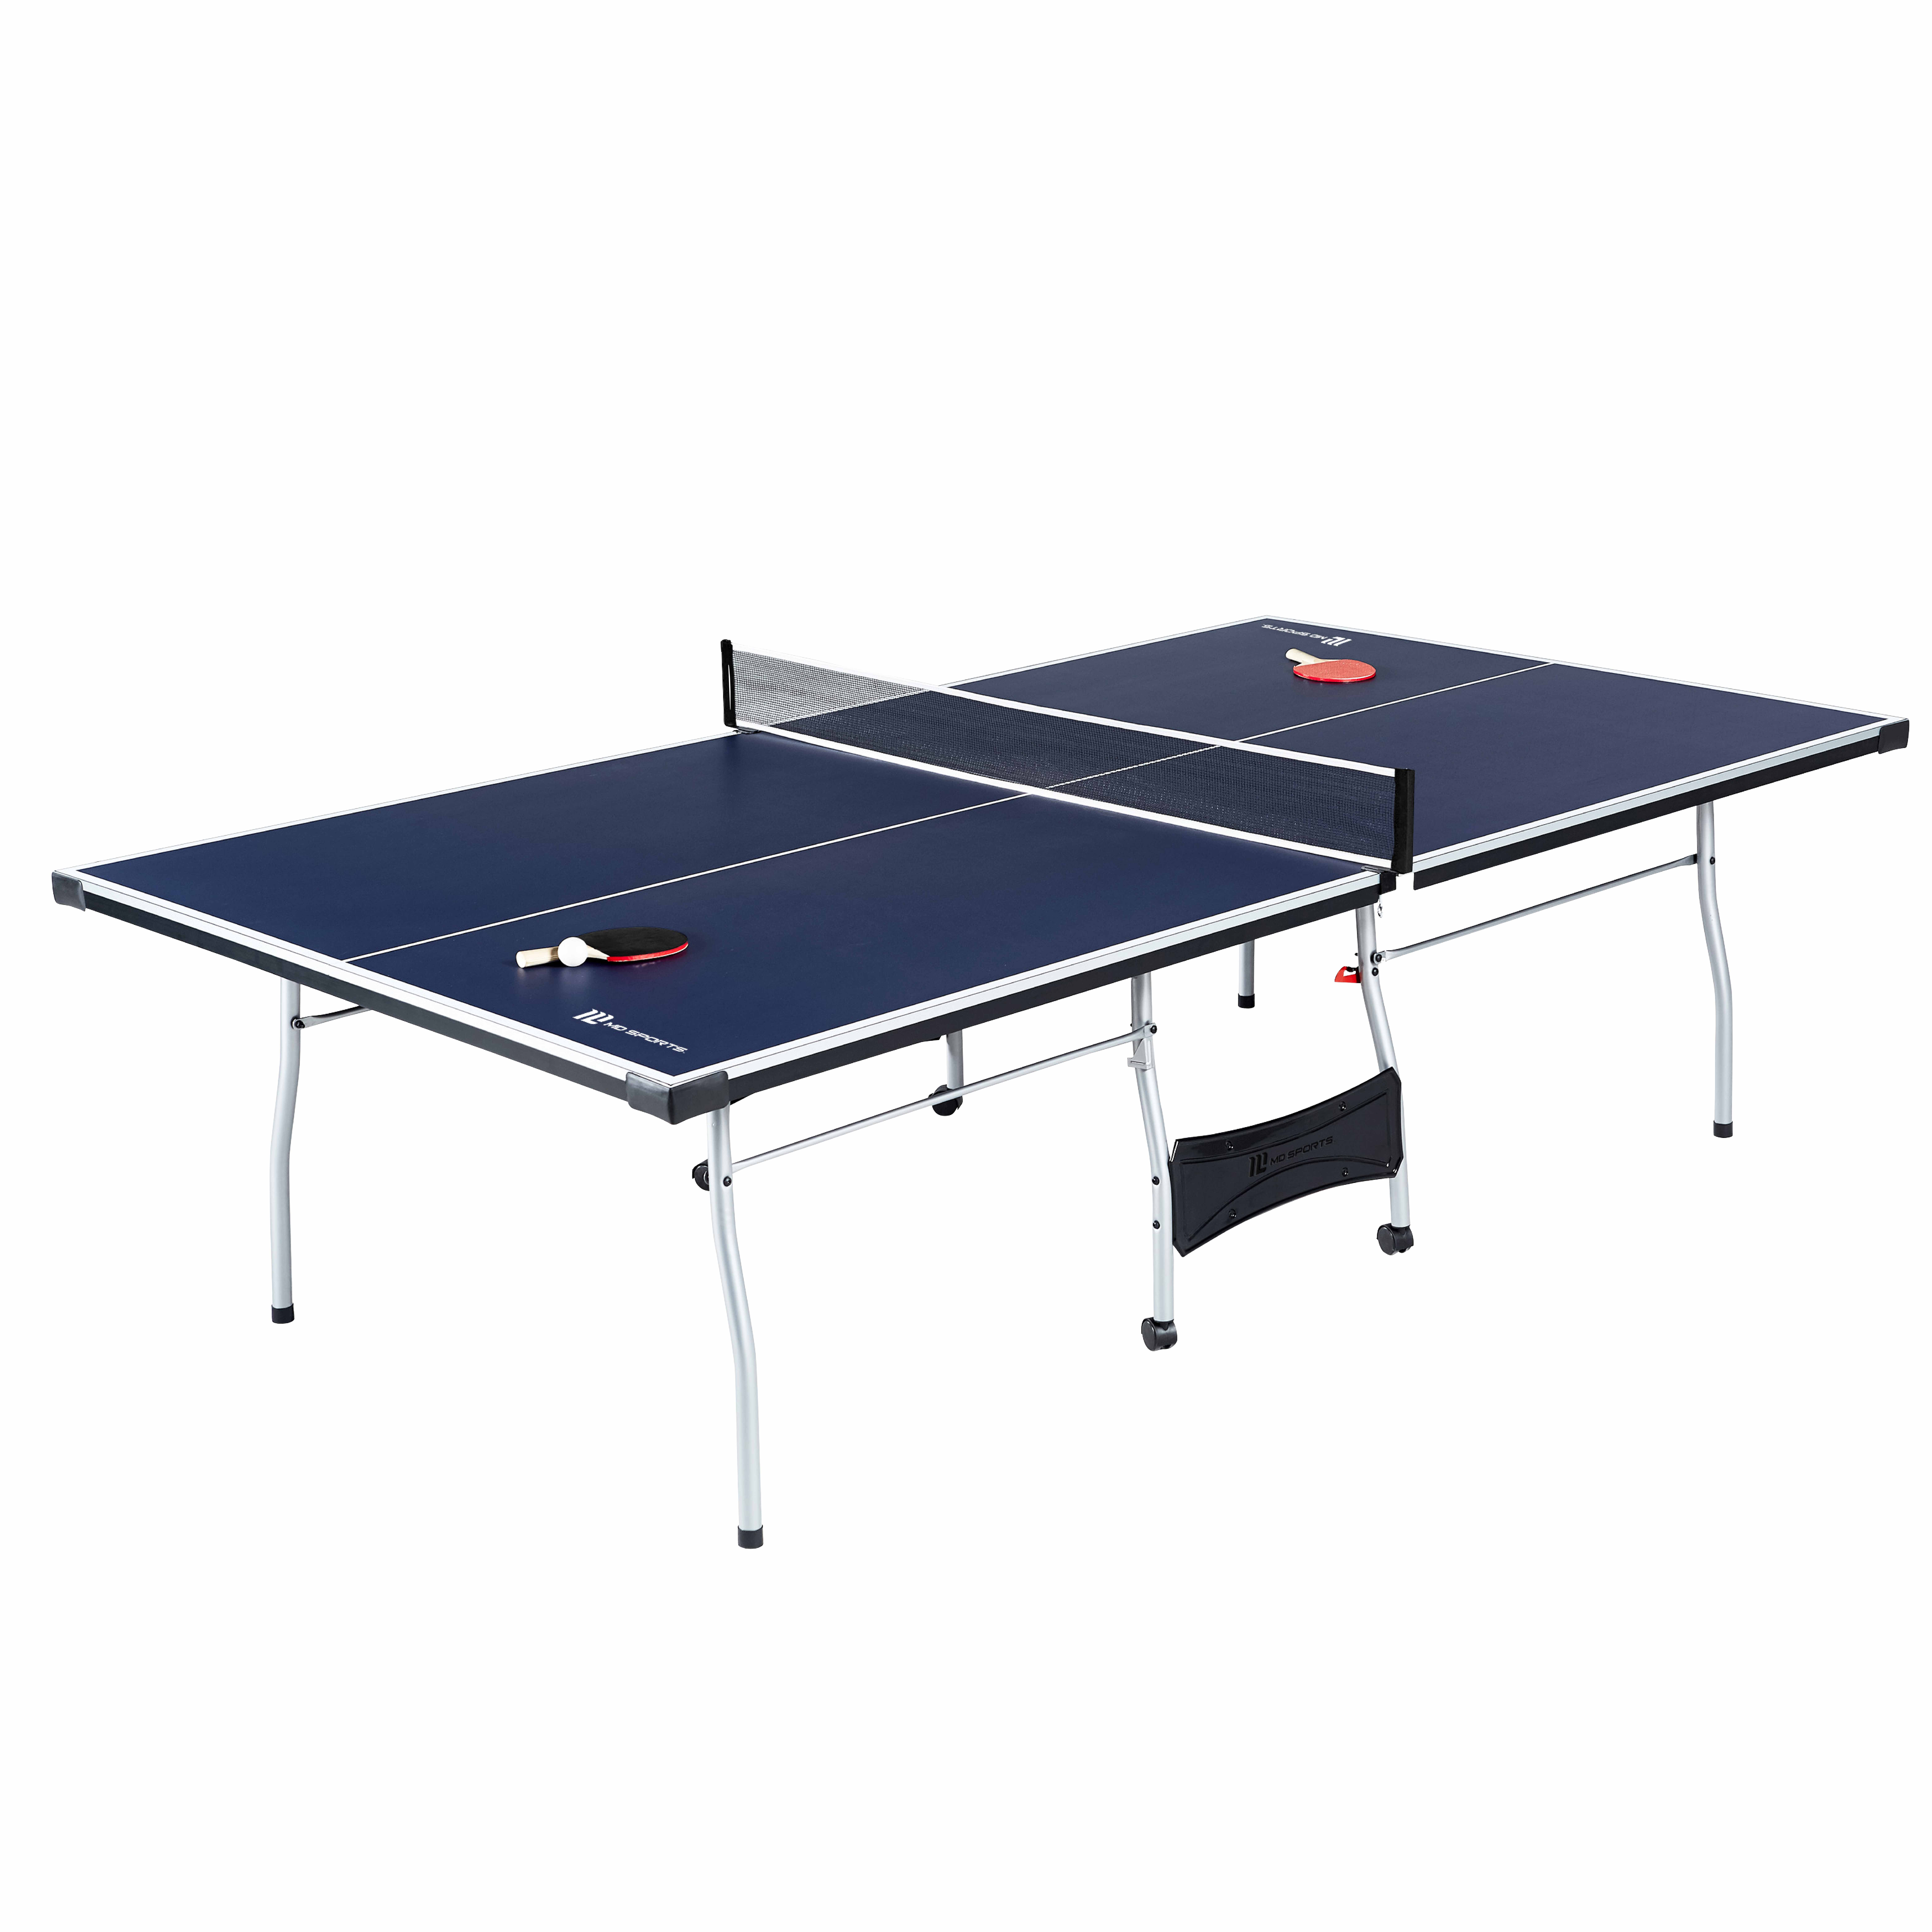 MD Sports Official Size 15 mm 4 Piece Indoor Table Tennis